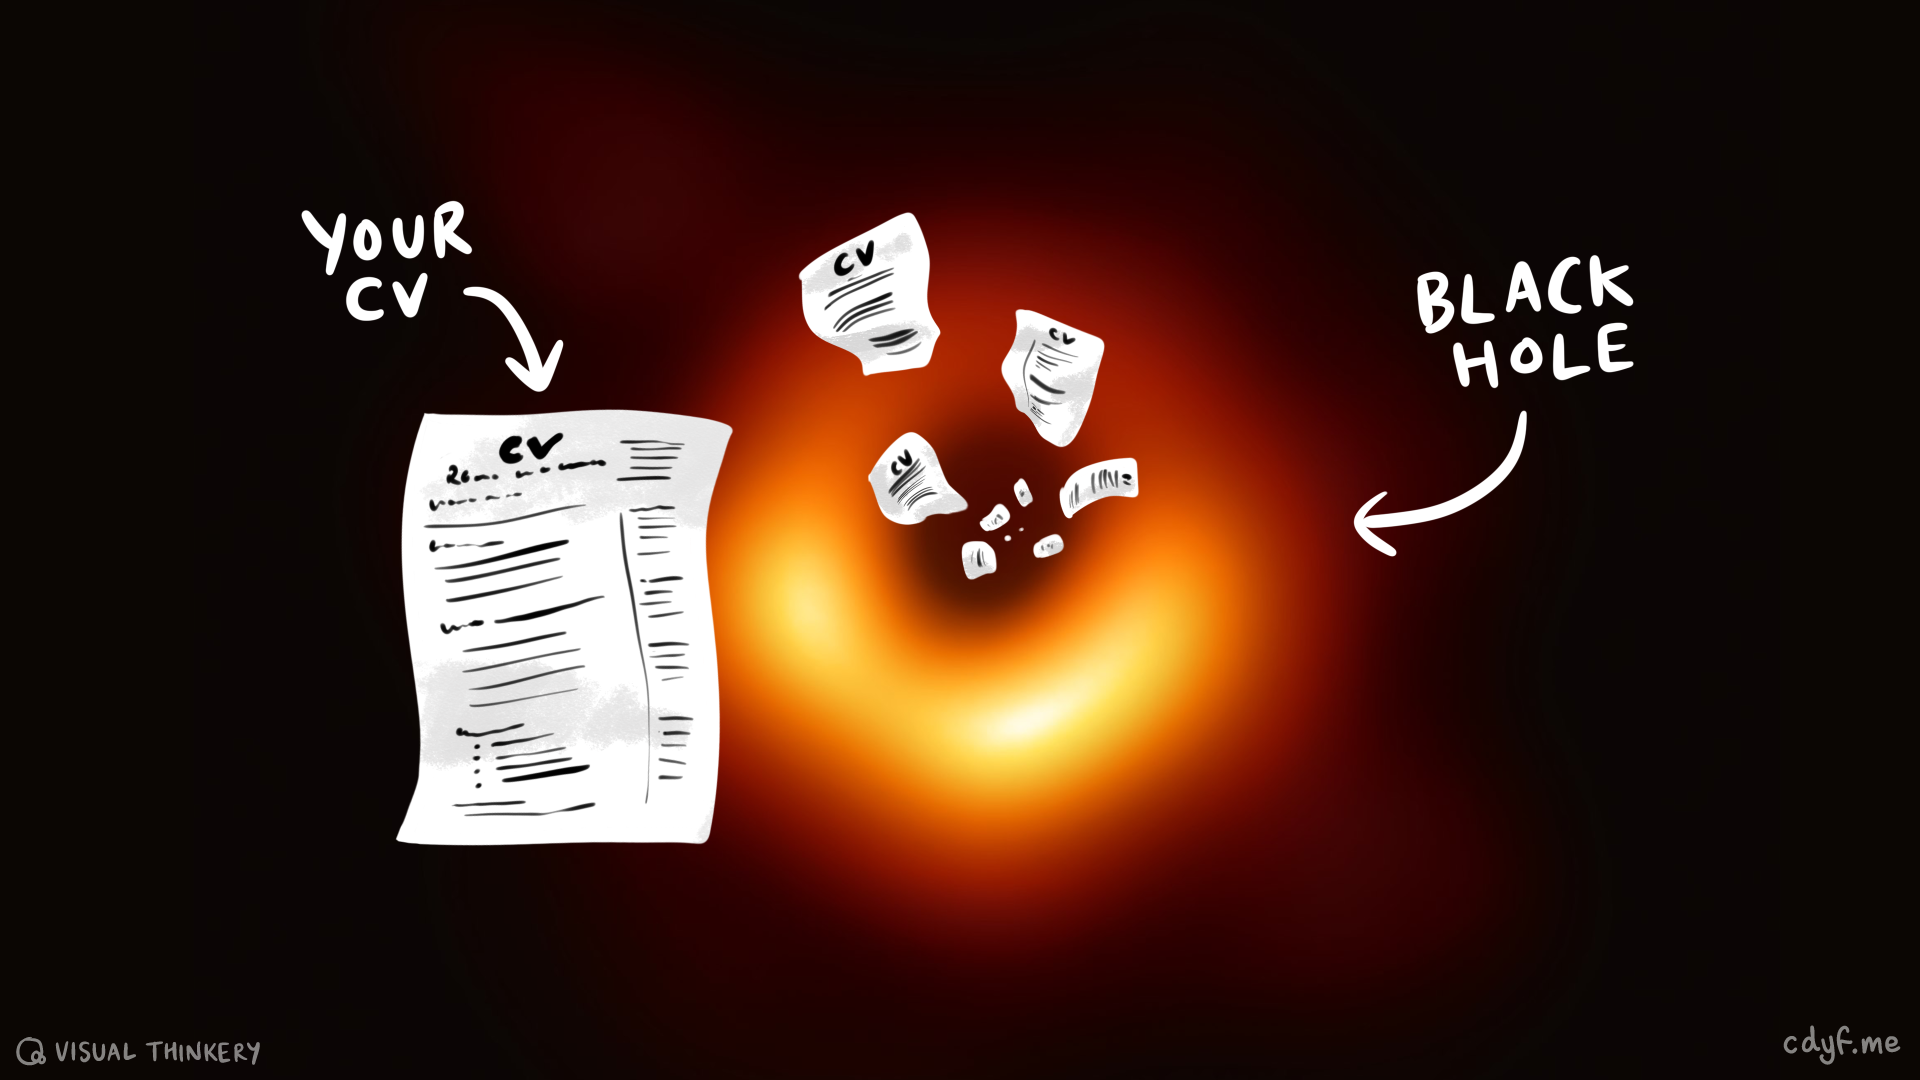 Rejection is a normal part of applying for jobs, some of your applications may disappear without trace into the employer “black hole” described in section 8.2. Larger employers with a strong gravitational force on candidates like you are likely to behave like supermassive black holes for job applications. This doesn’t mean you shouldn’t bother applying, but that you need to think about how to make your application stand out and avoid taking it personally if/when you don’t hear back. CV black hole sketch by Visual Thinkery is licensed under CC-BY-ND, based on an original image of the supermassive black hole in Messier 87 created using the CHIRP algorithm by the Event Horizon Telescope team via Wikimedia Commons w.wiki/3RCa